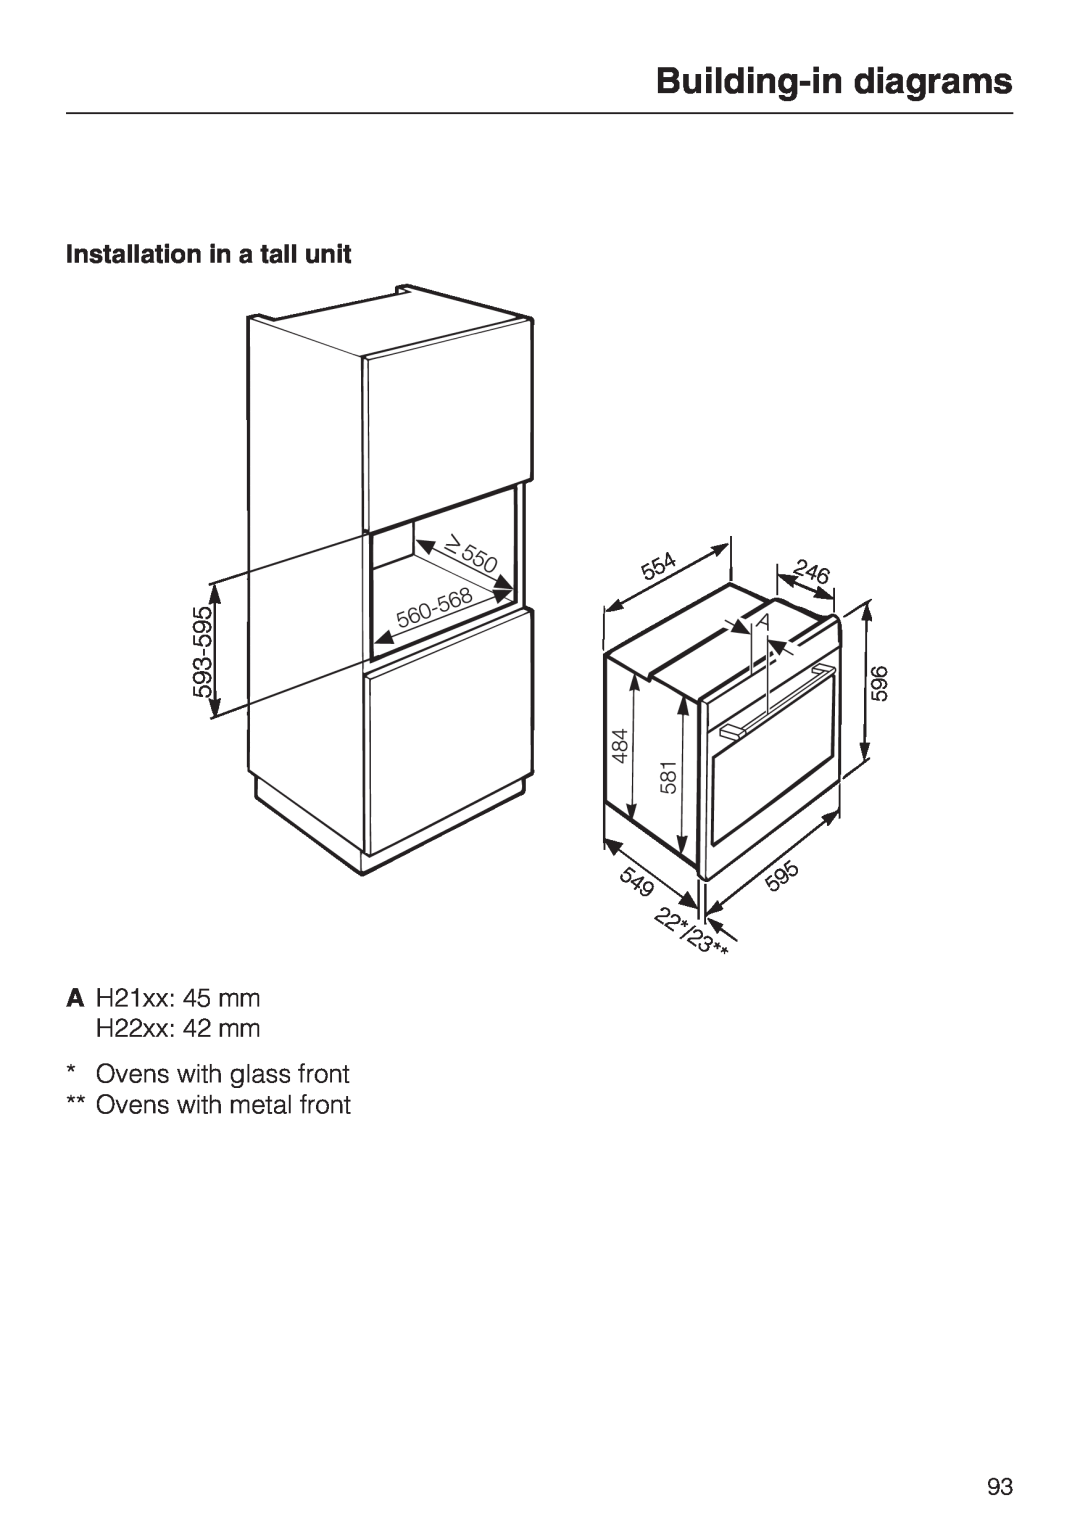 Miele 10 102 470 installation instructions Building-indiagrams, Installation in a tall unit 